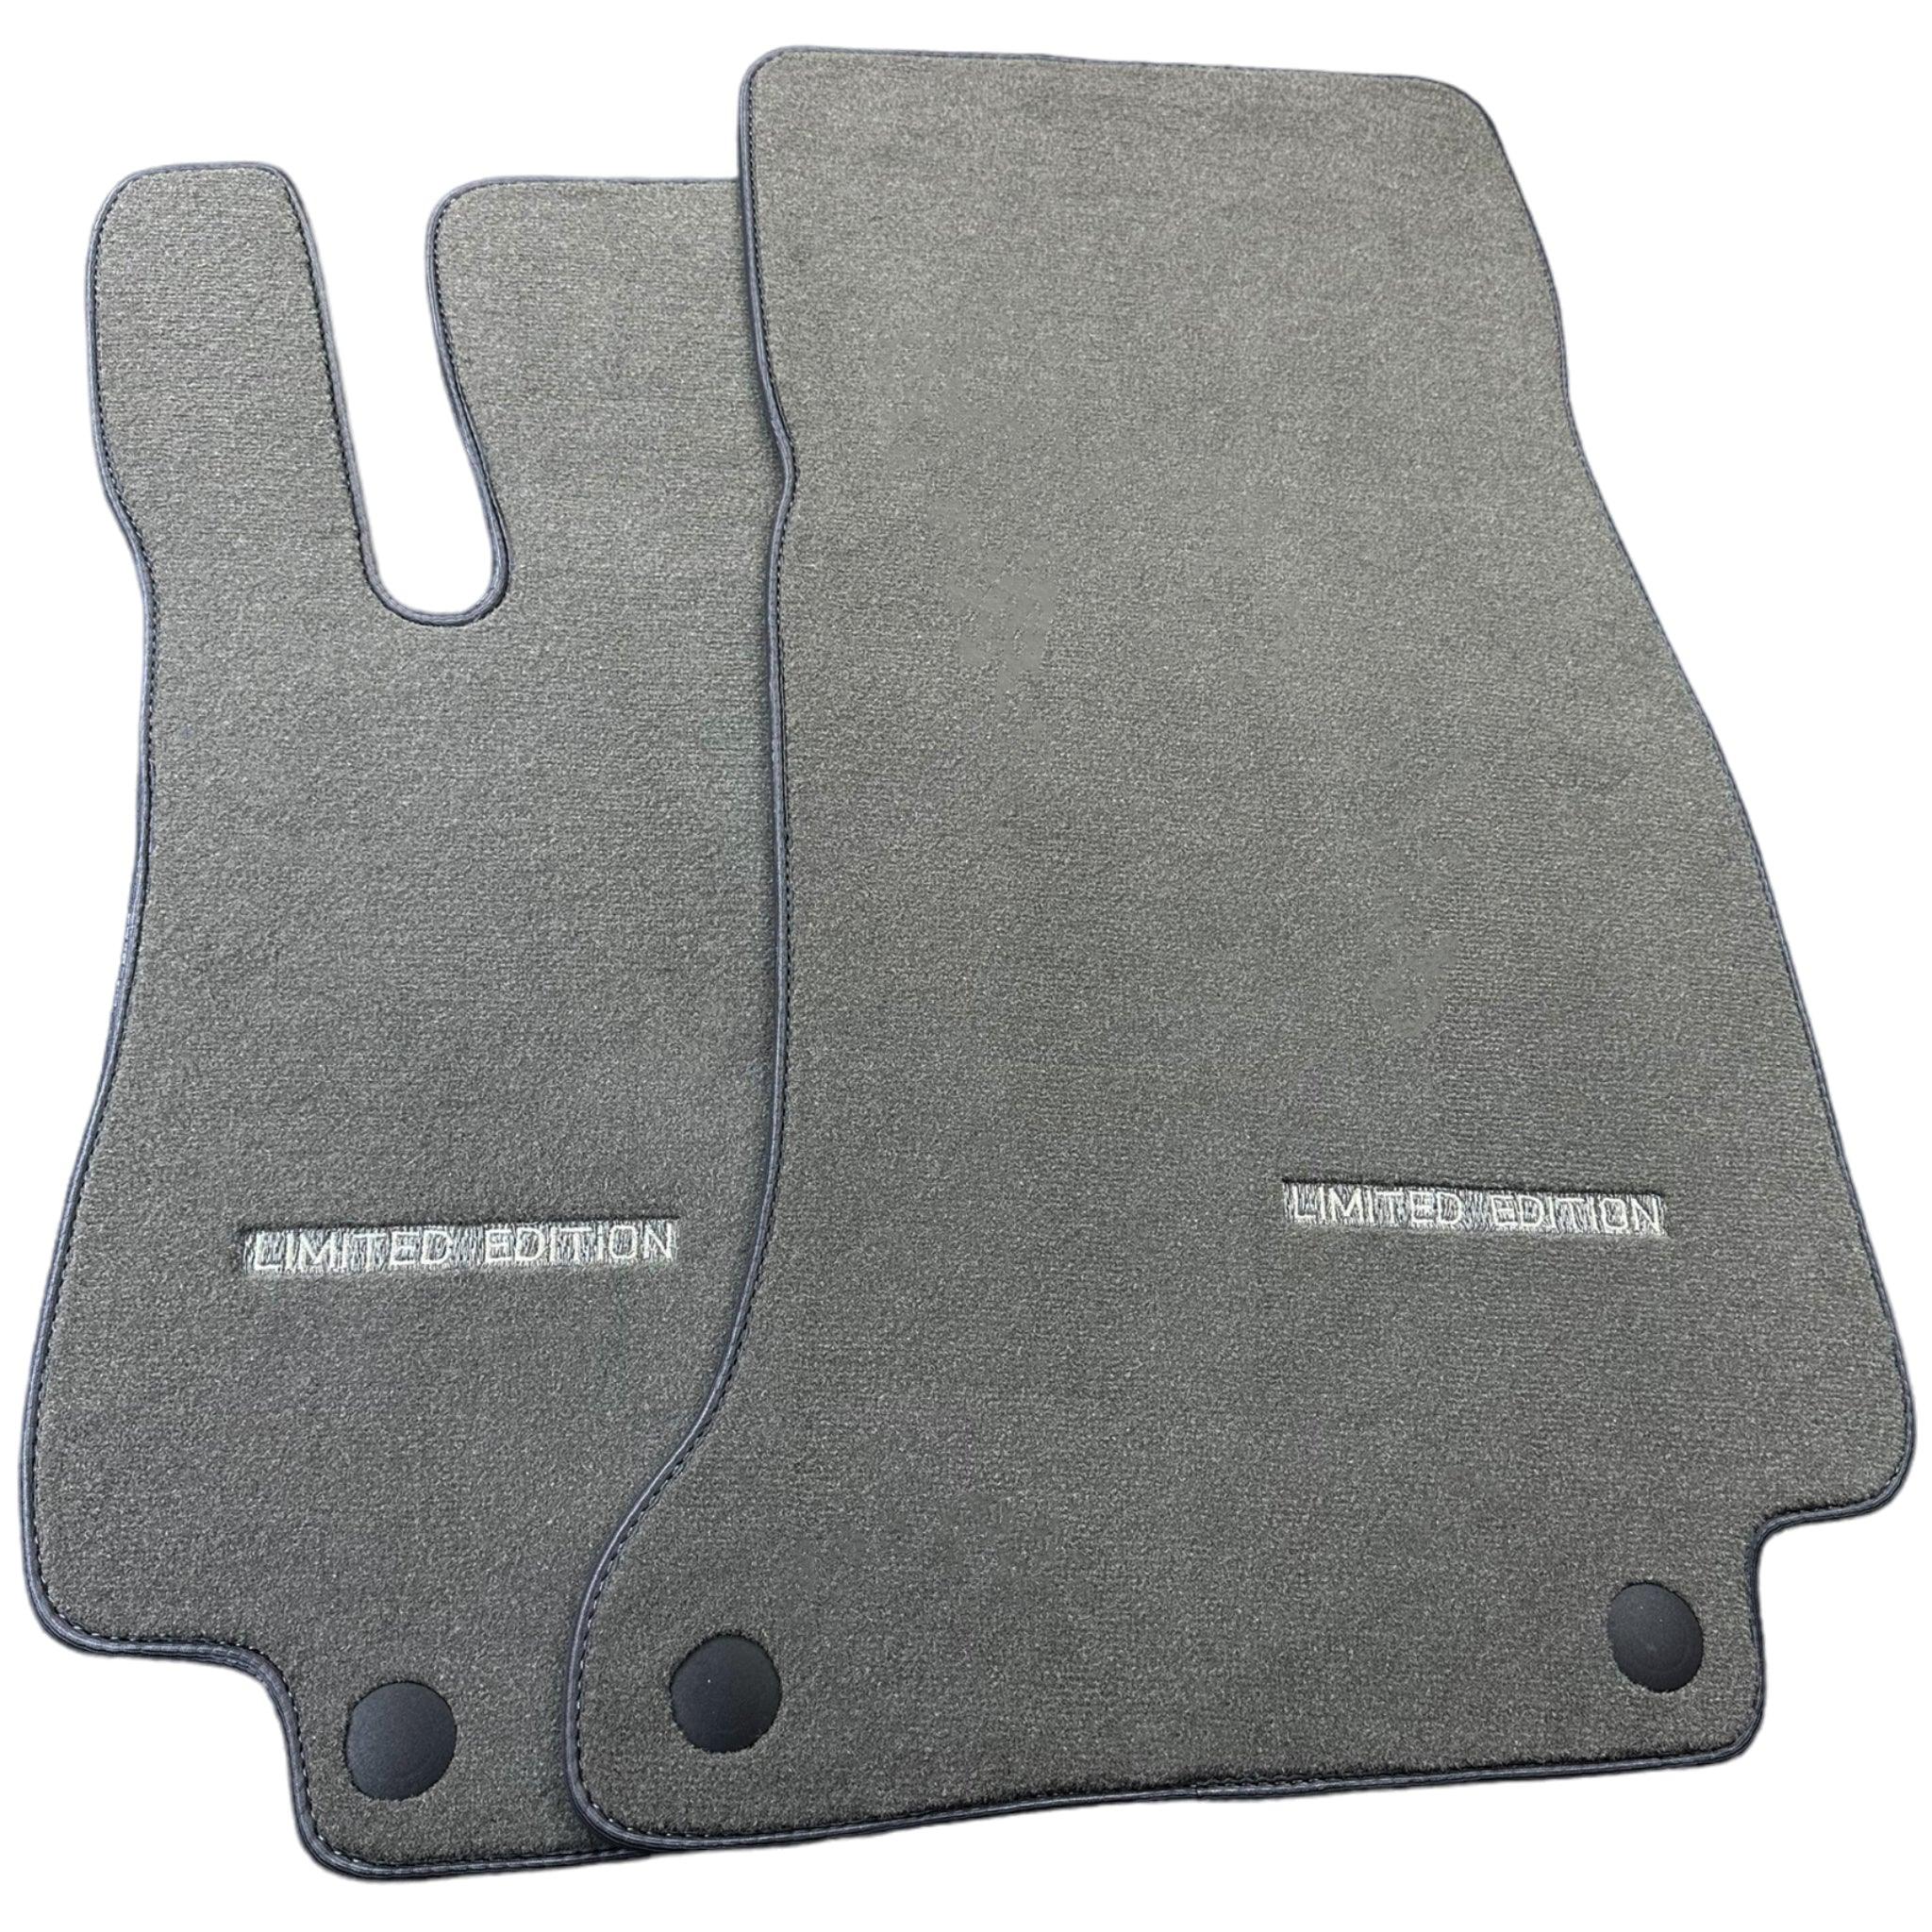 Gray Floor Mats For Mercedes Benz E-Class C207 Coupe Facelift (2013-2017) | Limited Edition